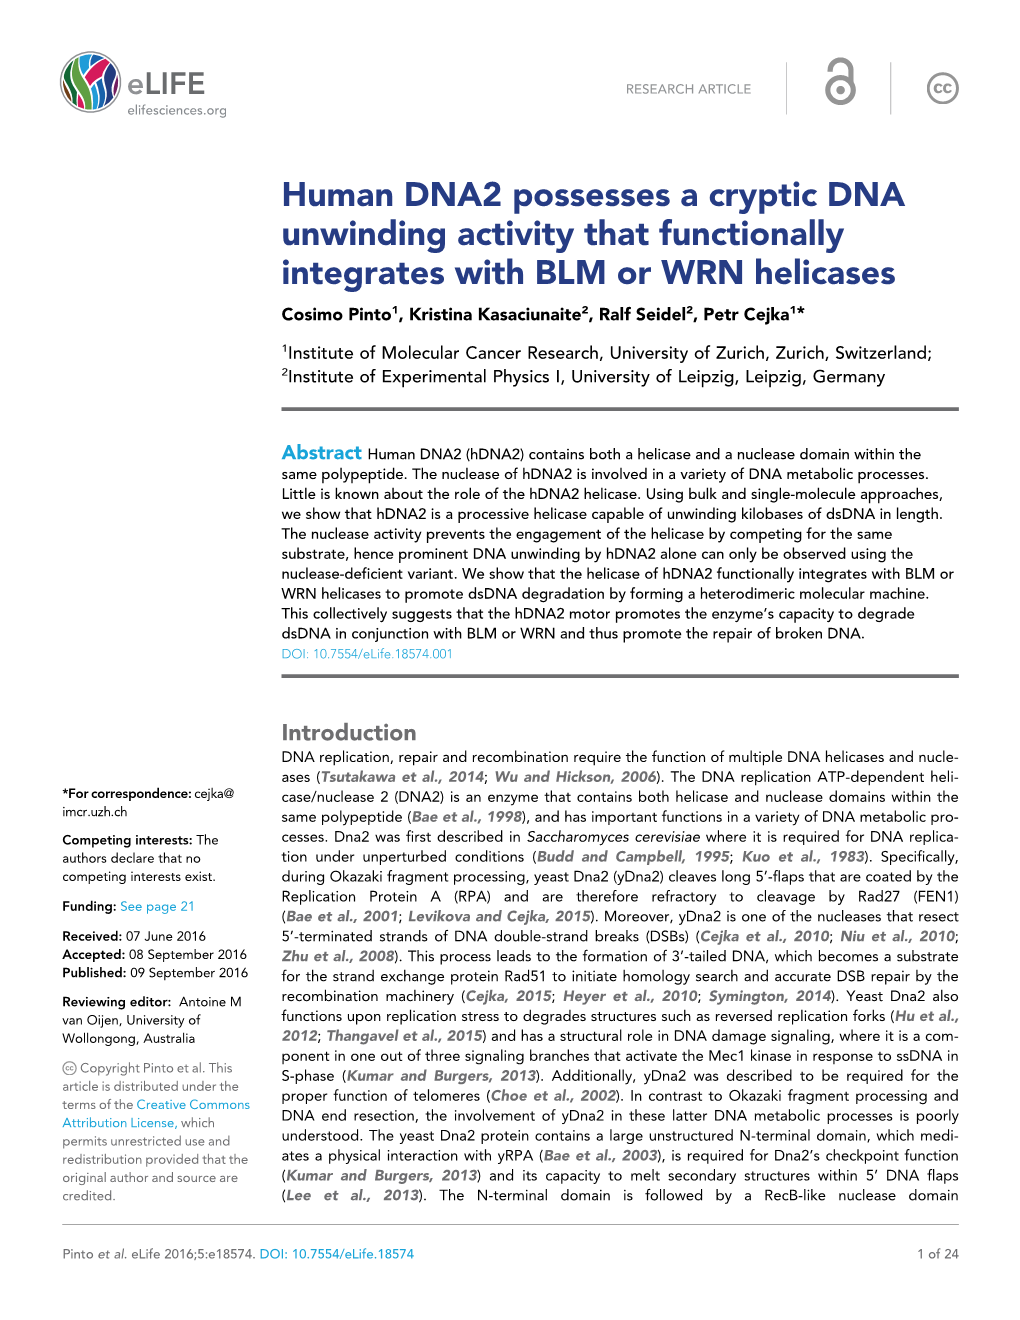 Human DNA2 Possesses a Cryptic DNA Unwinding Activity That